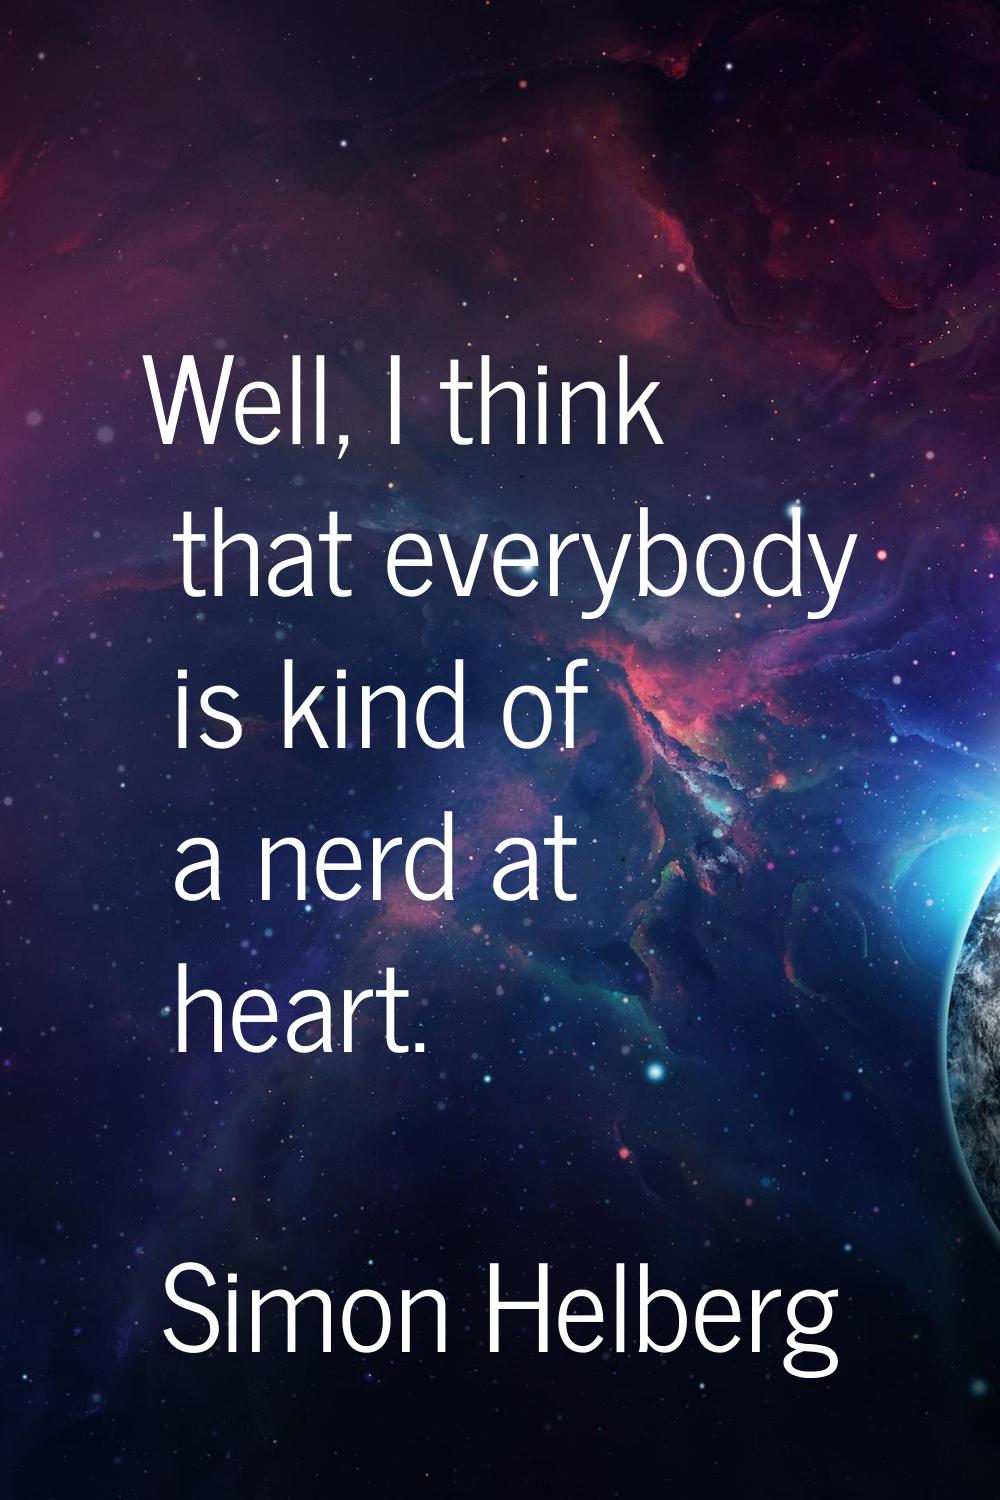 Well, I think that everybody is kind of a nerd at heart.